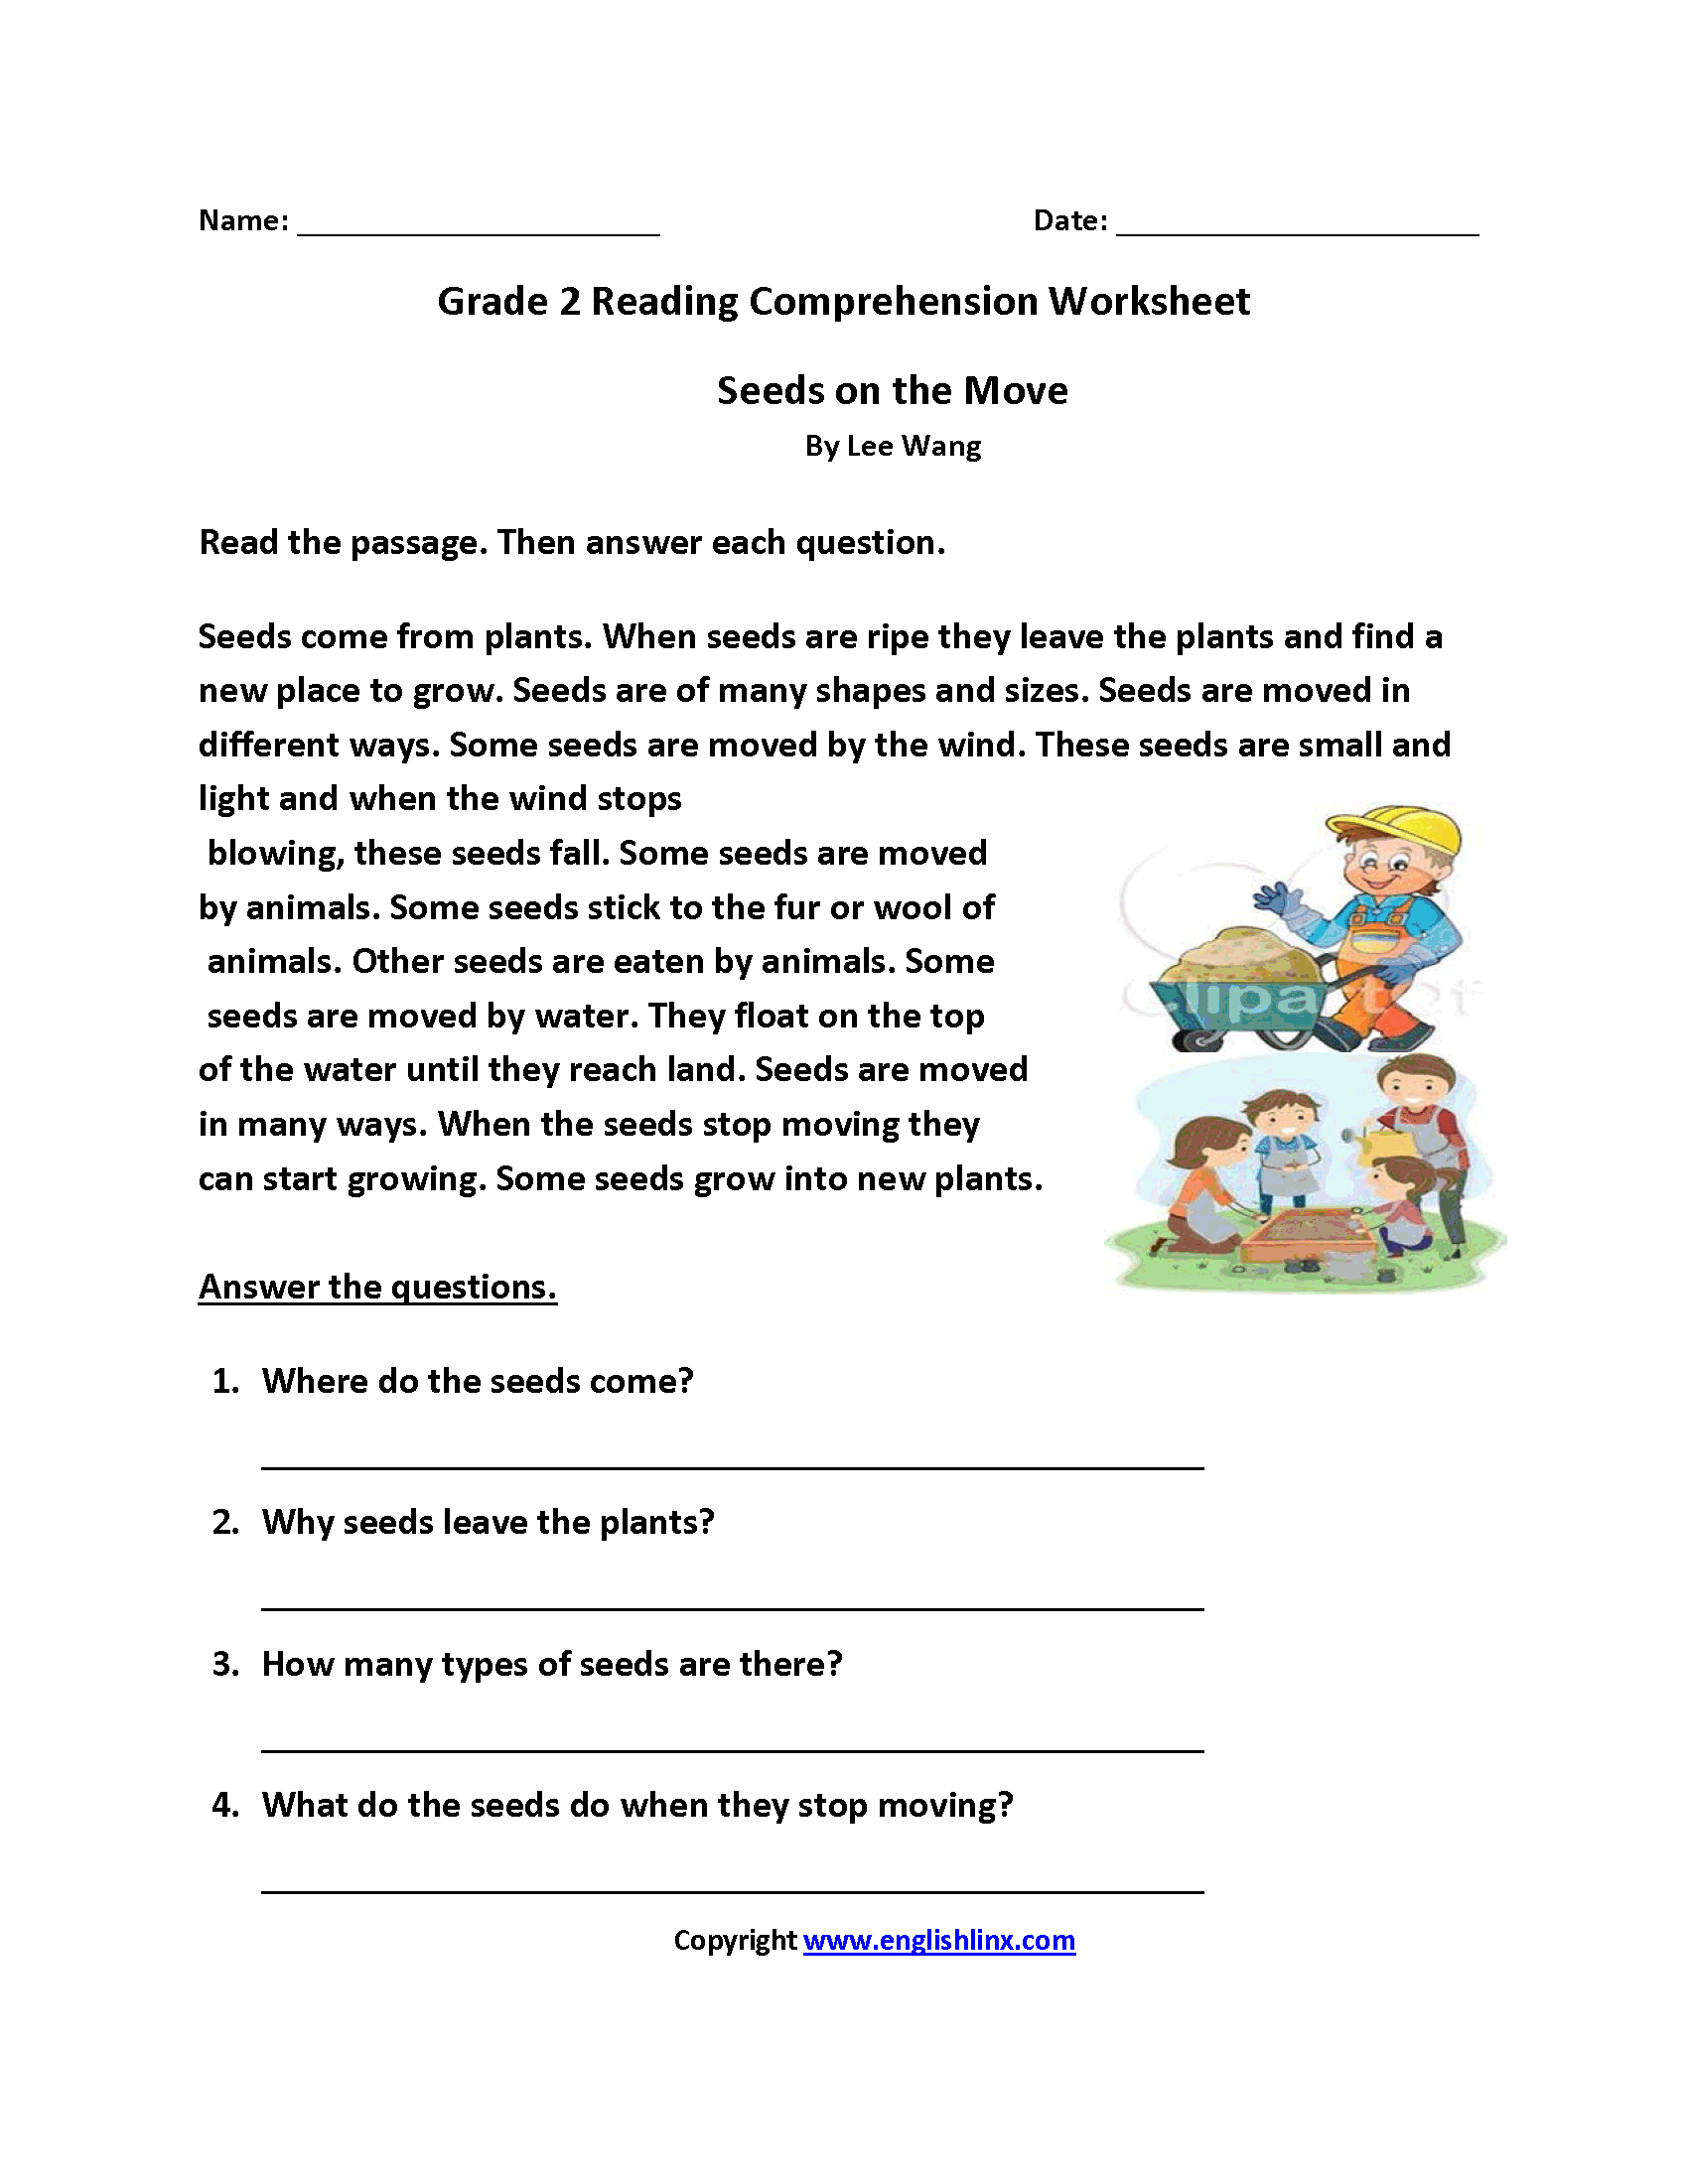 Seeds on Move Second Grade Reading Worksheets Reading comprehension